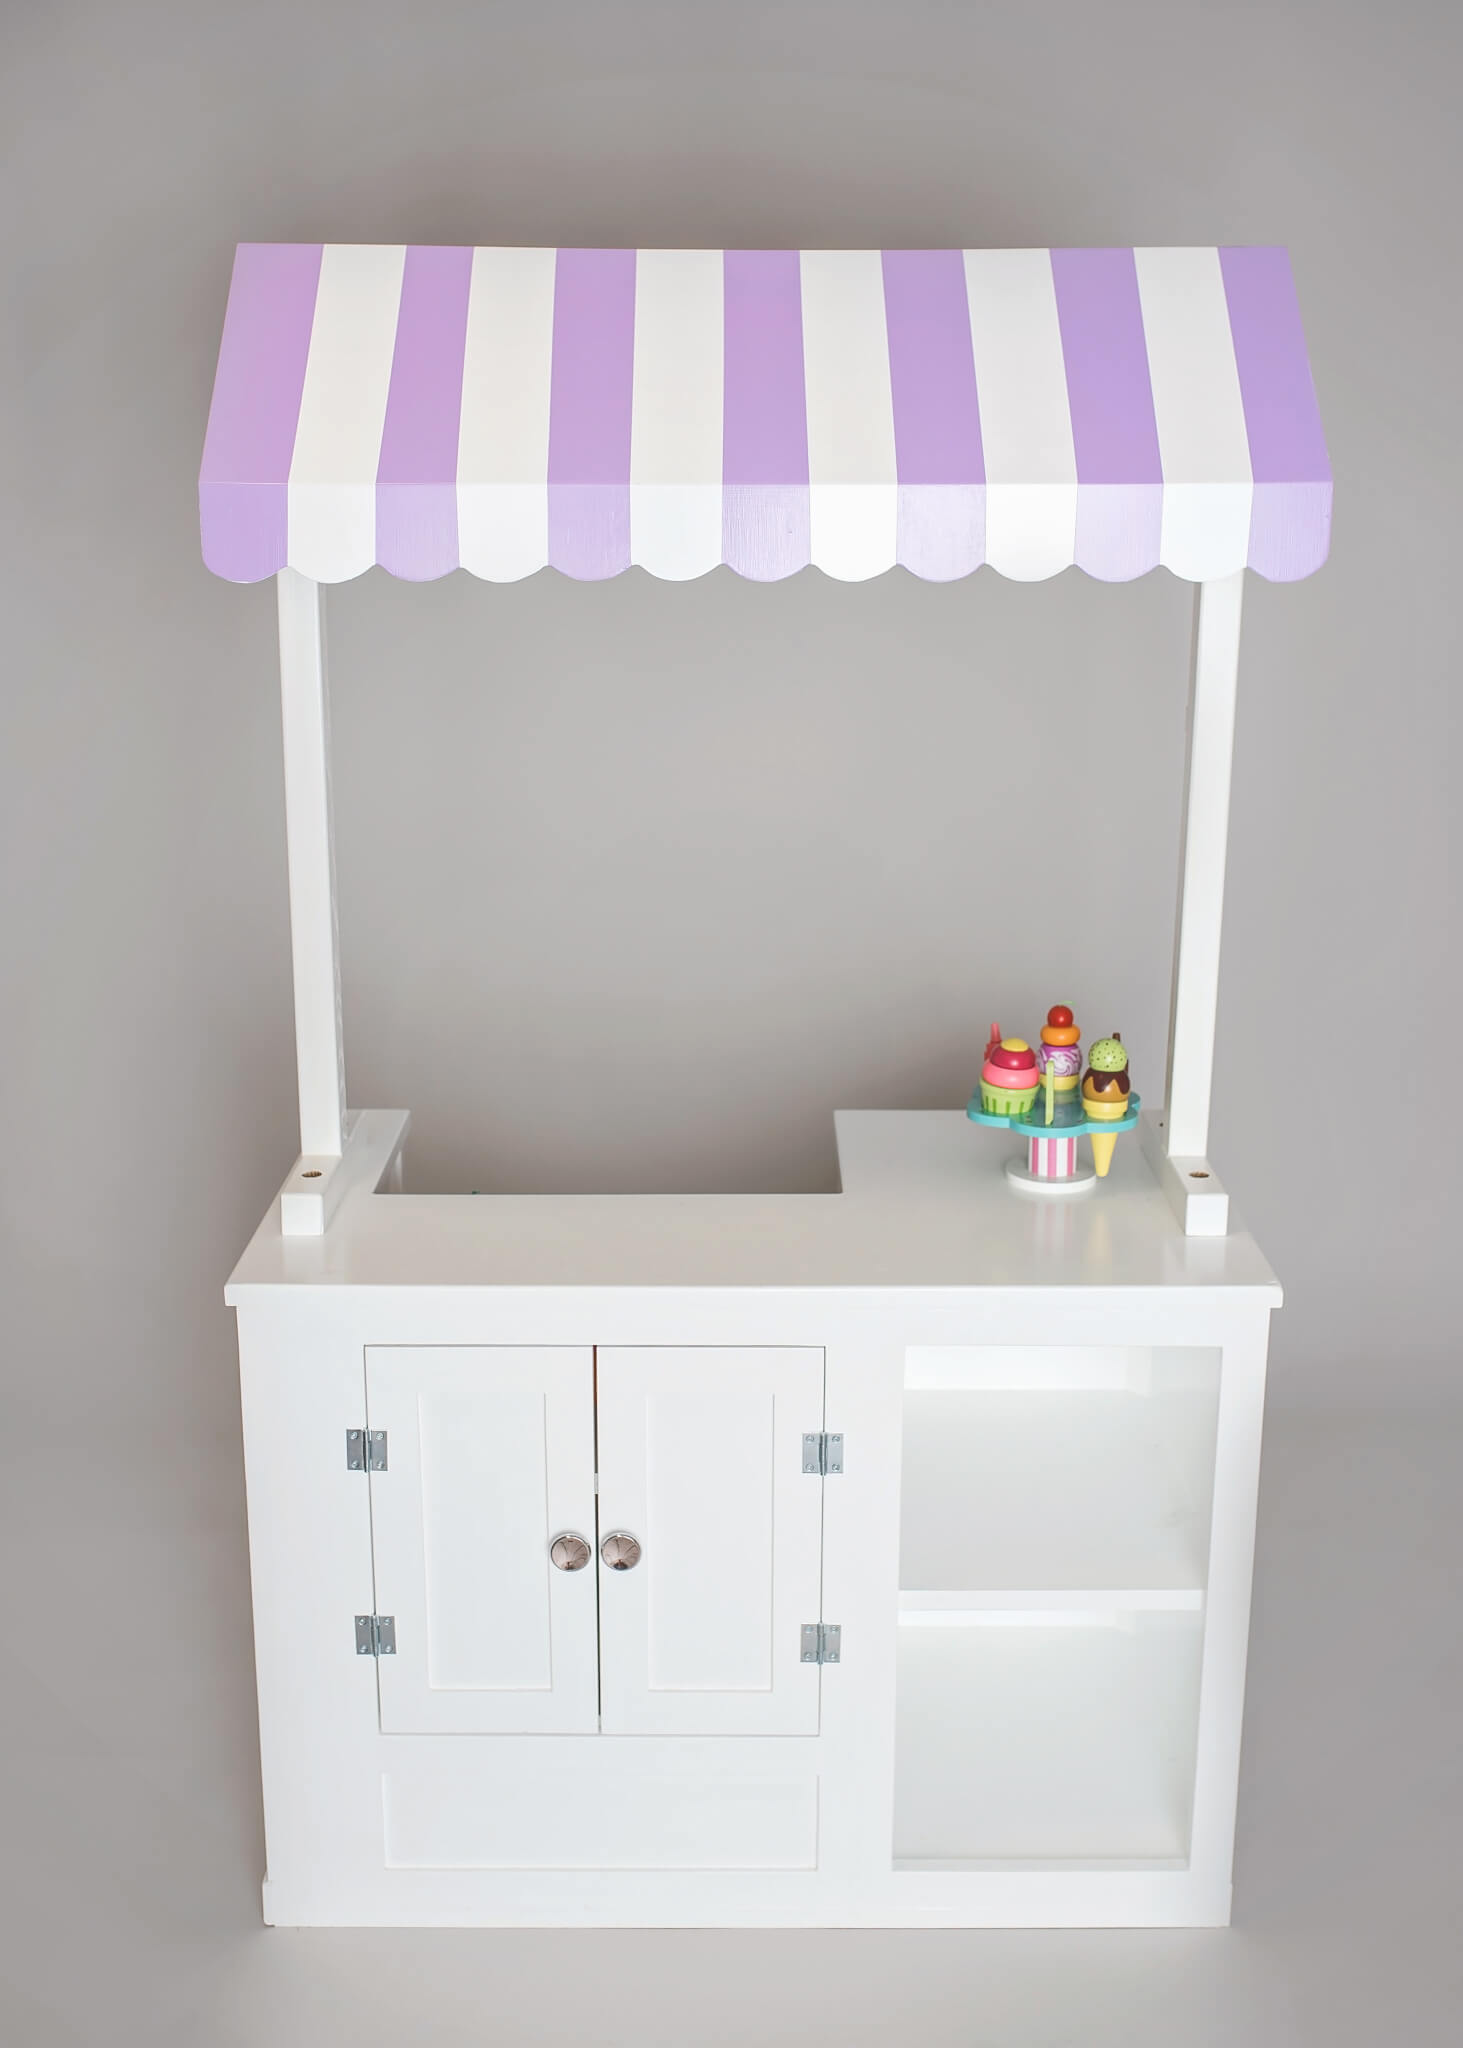 ICE CREAM PARLOR PLAY STAND  INTERCHANGEABLE THEMES - Styled By Mama